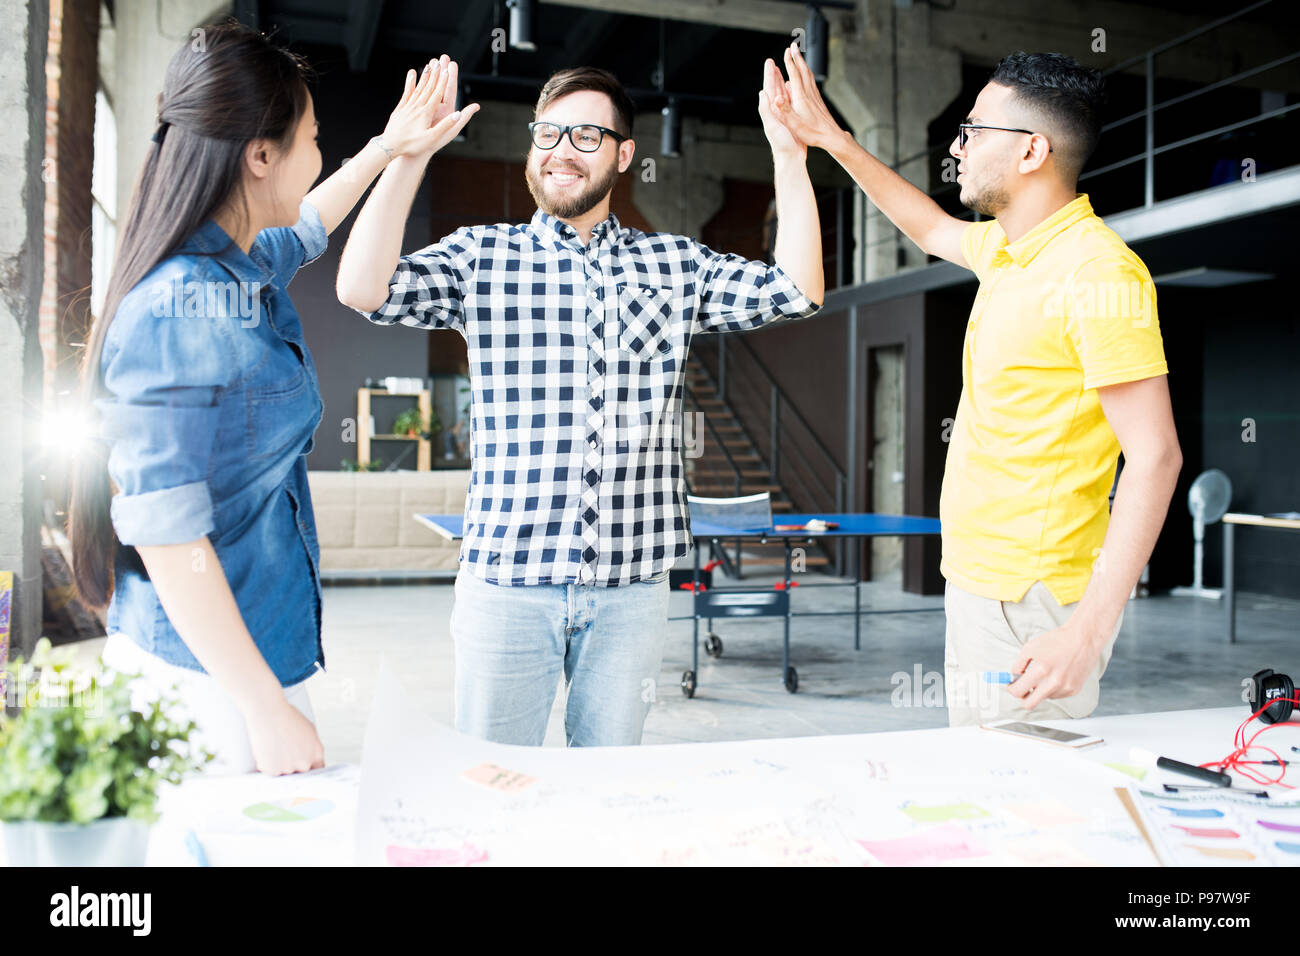 Creative Business Team High Five in Office Stock Photo